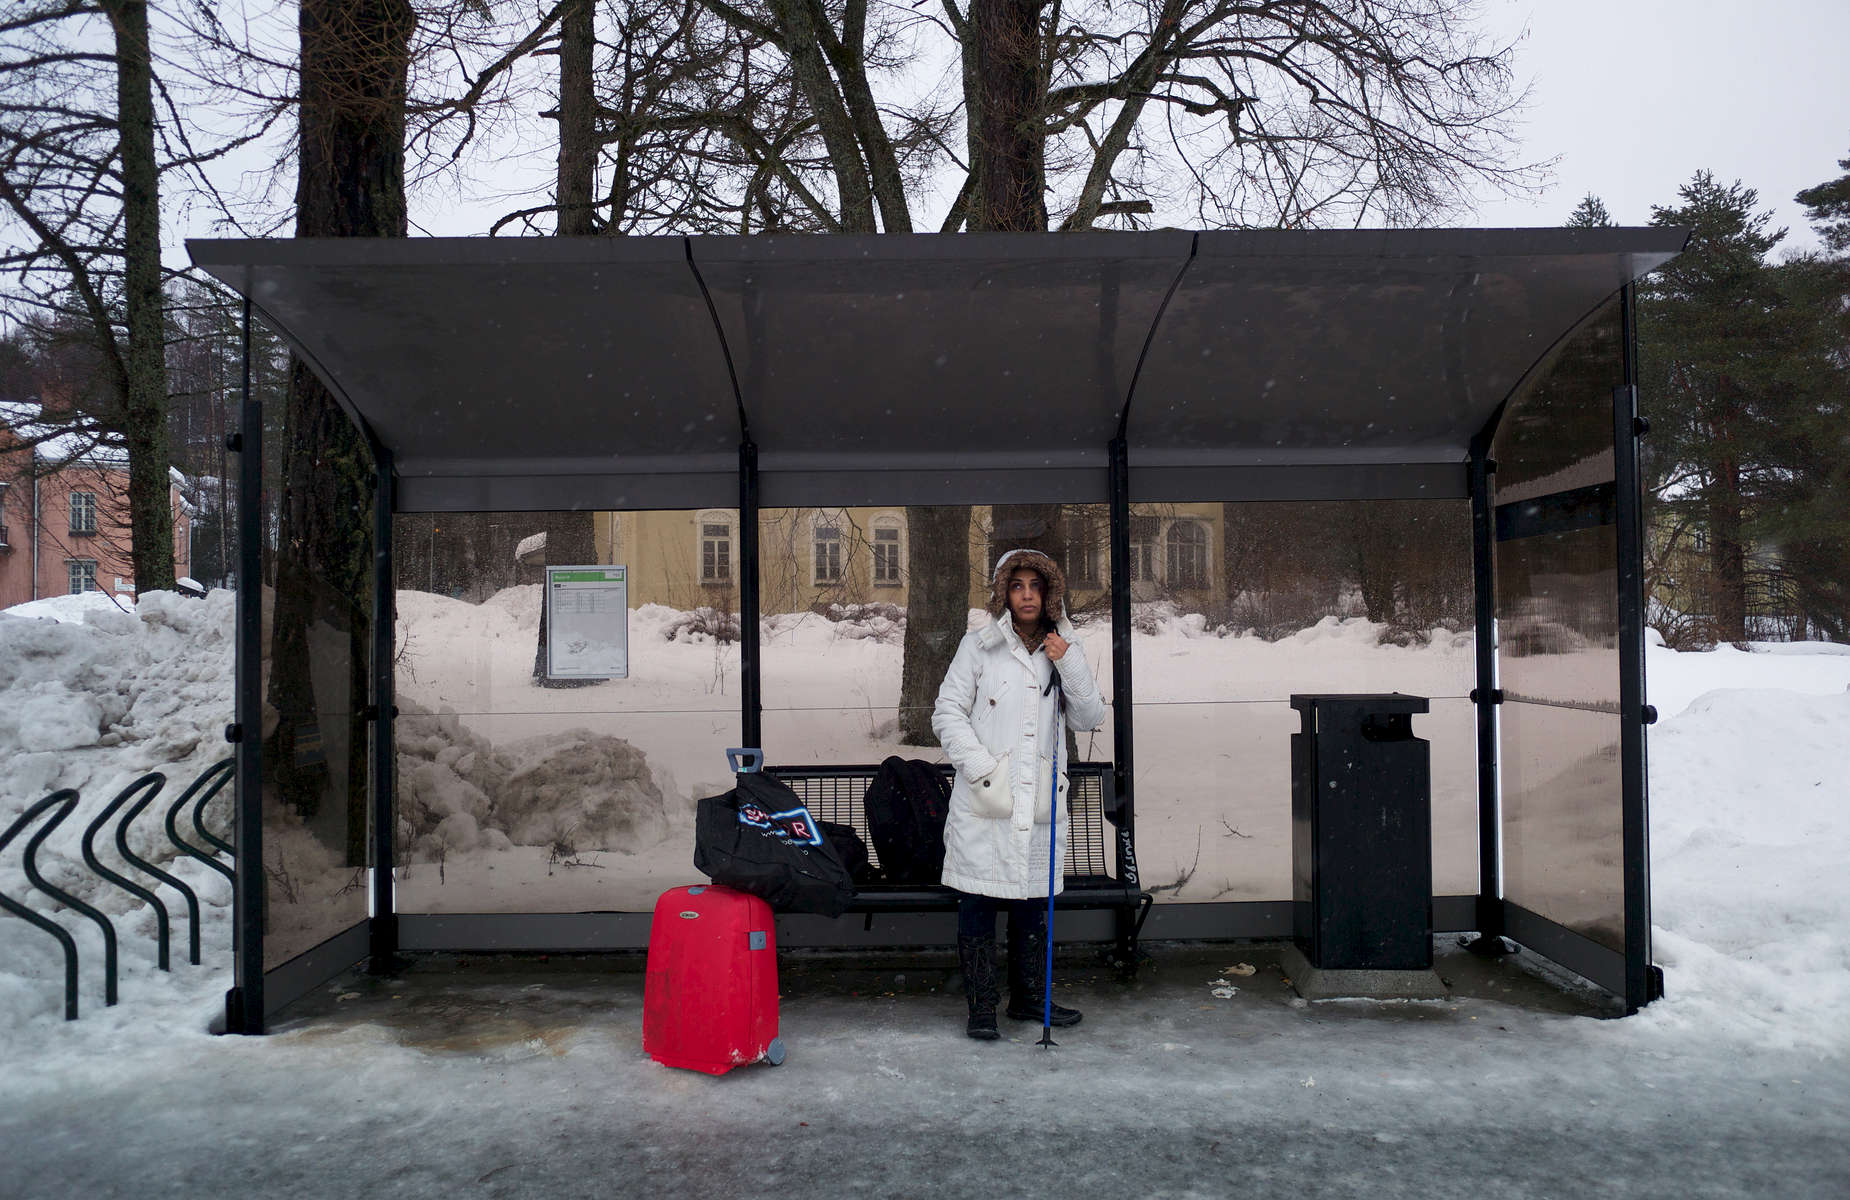 A rejected asylum seeker, with her luggage, stands alone at a bus stop.